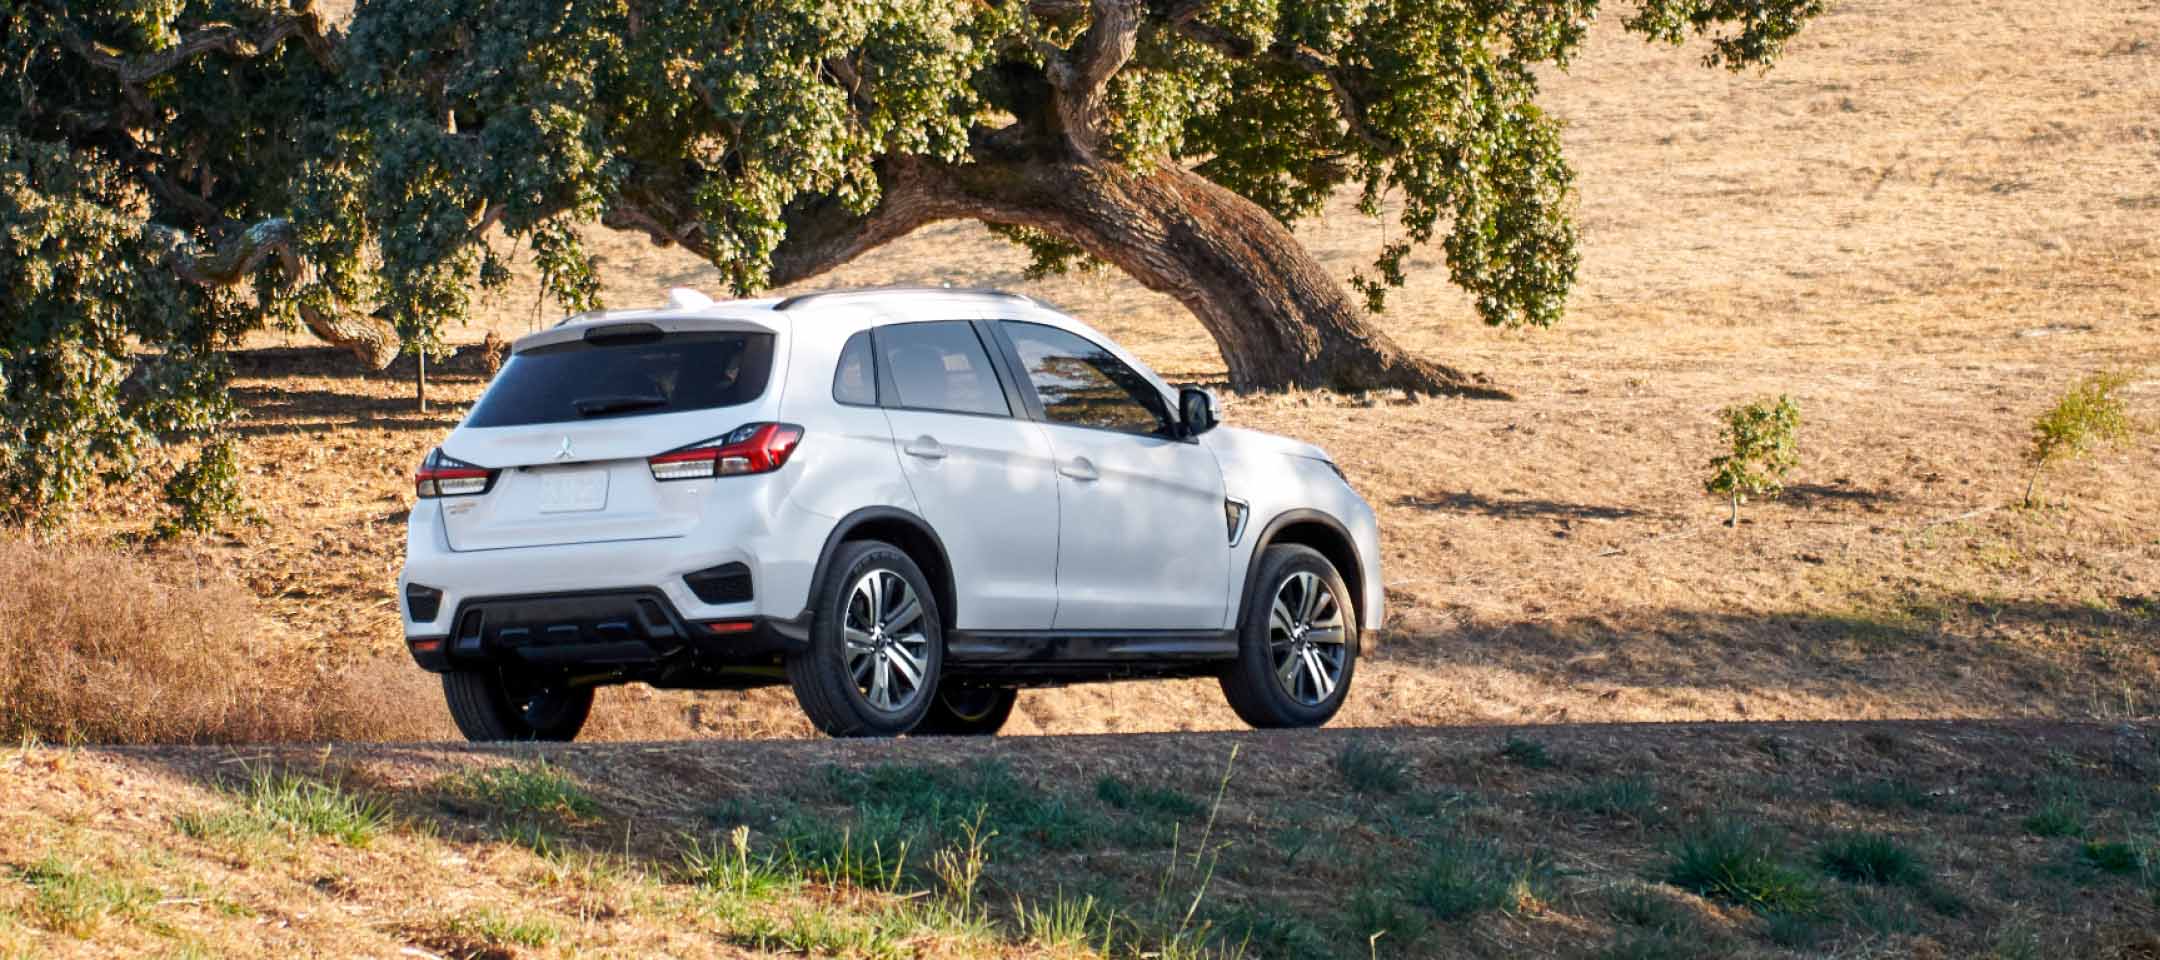 Back and side view of a white 2023 Mitsubishi Outlander Sport SUV driving off-road